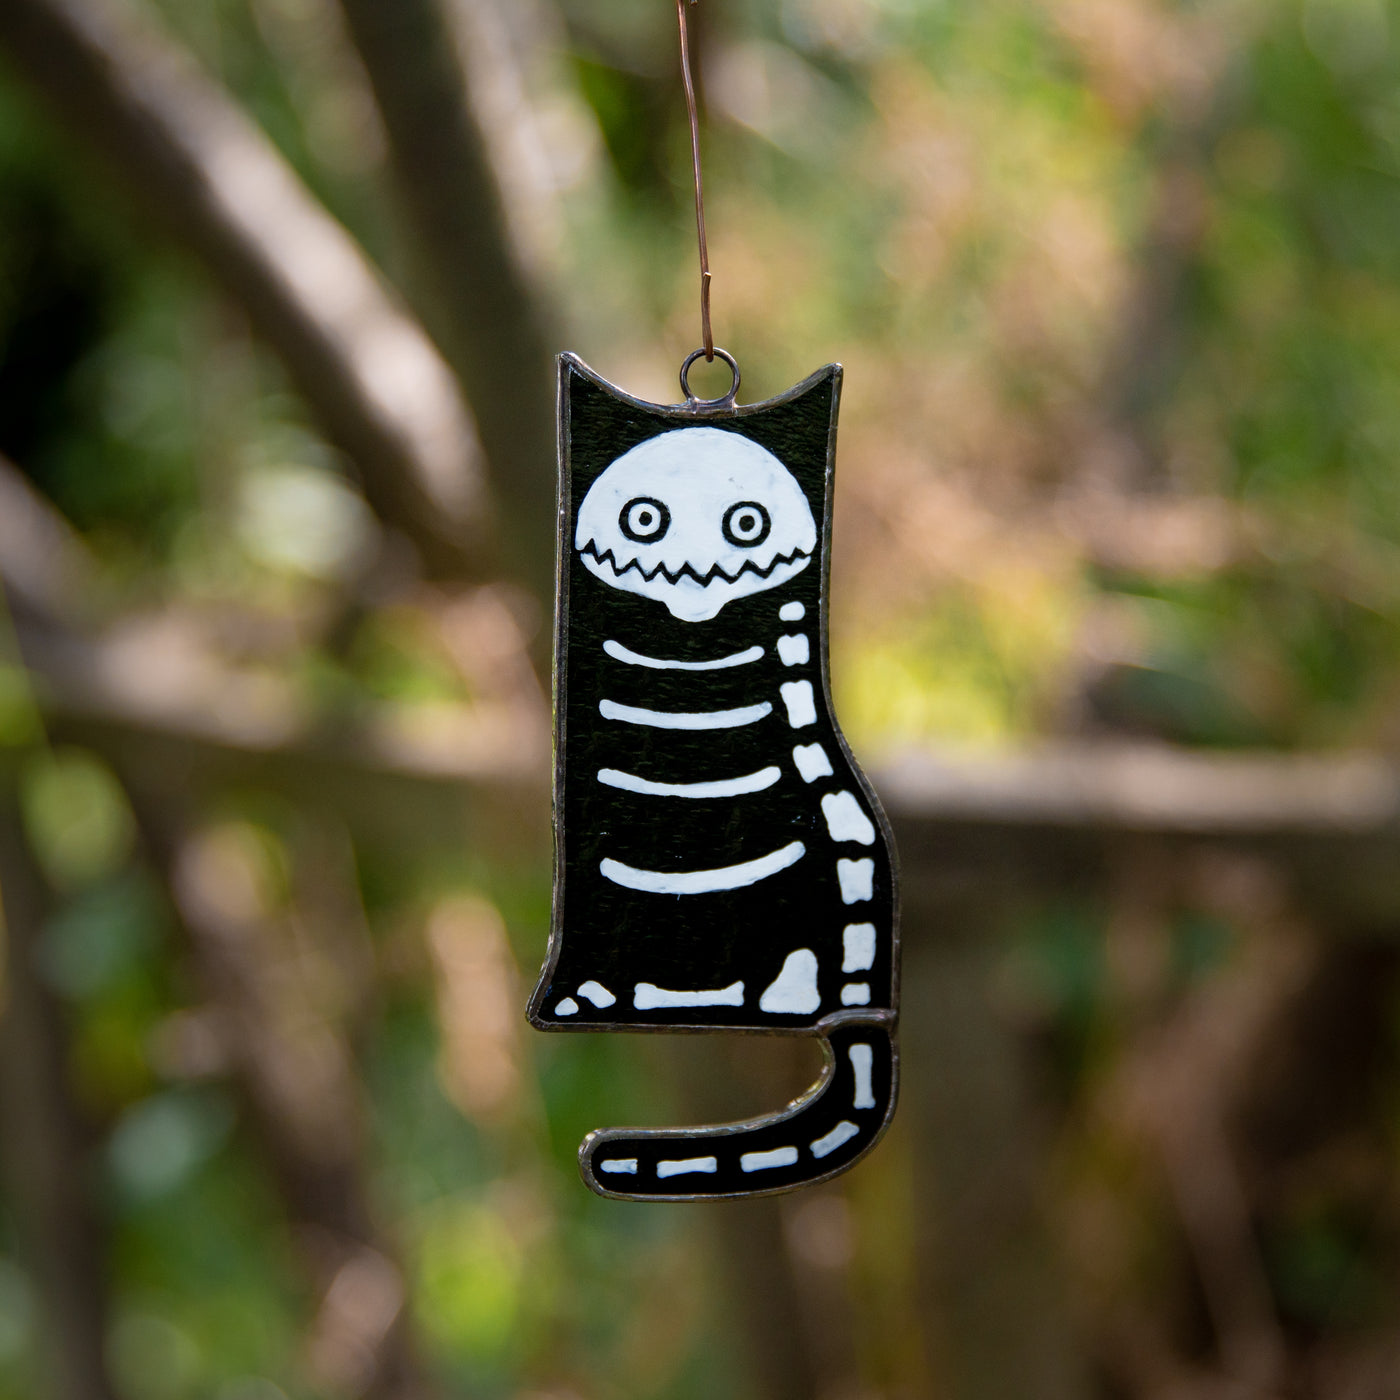 Stained glass suncatcher of a cat skeleton for ghastly Halloween decor